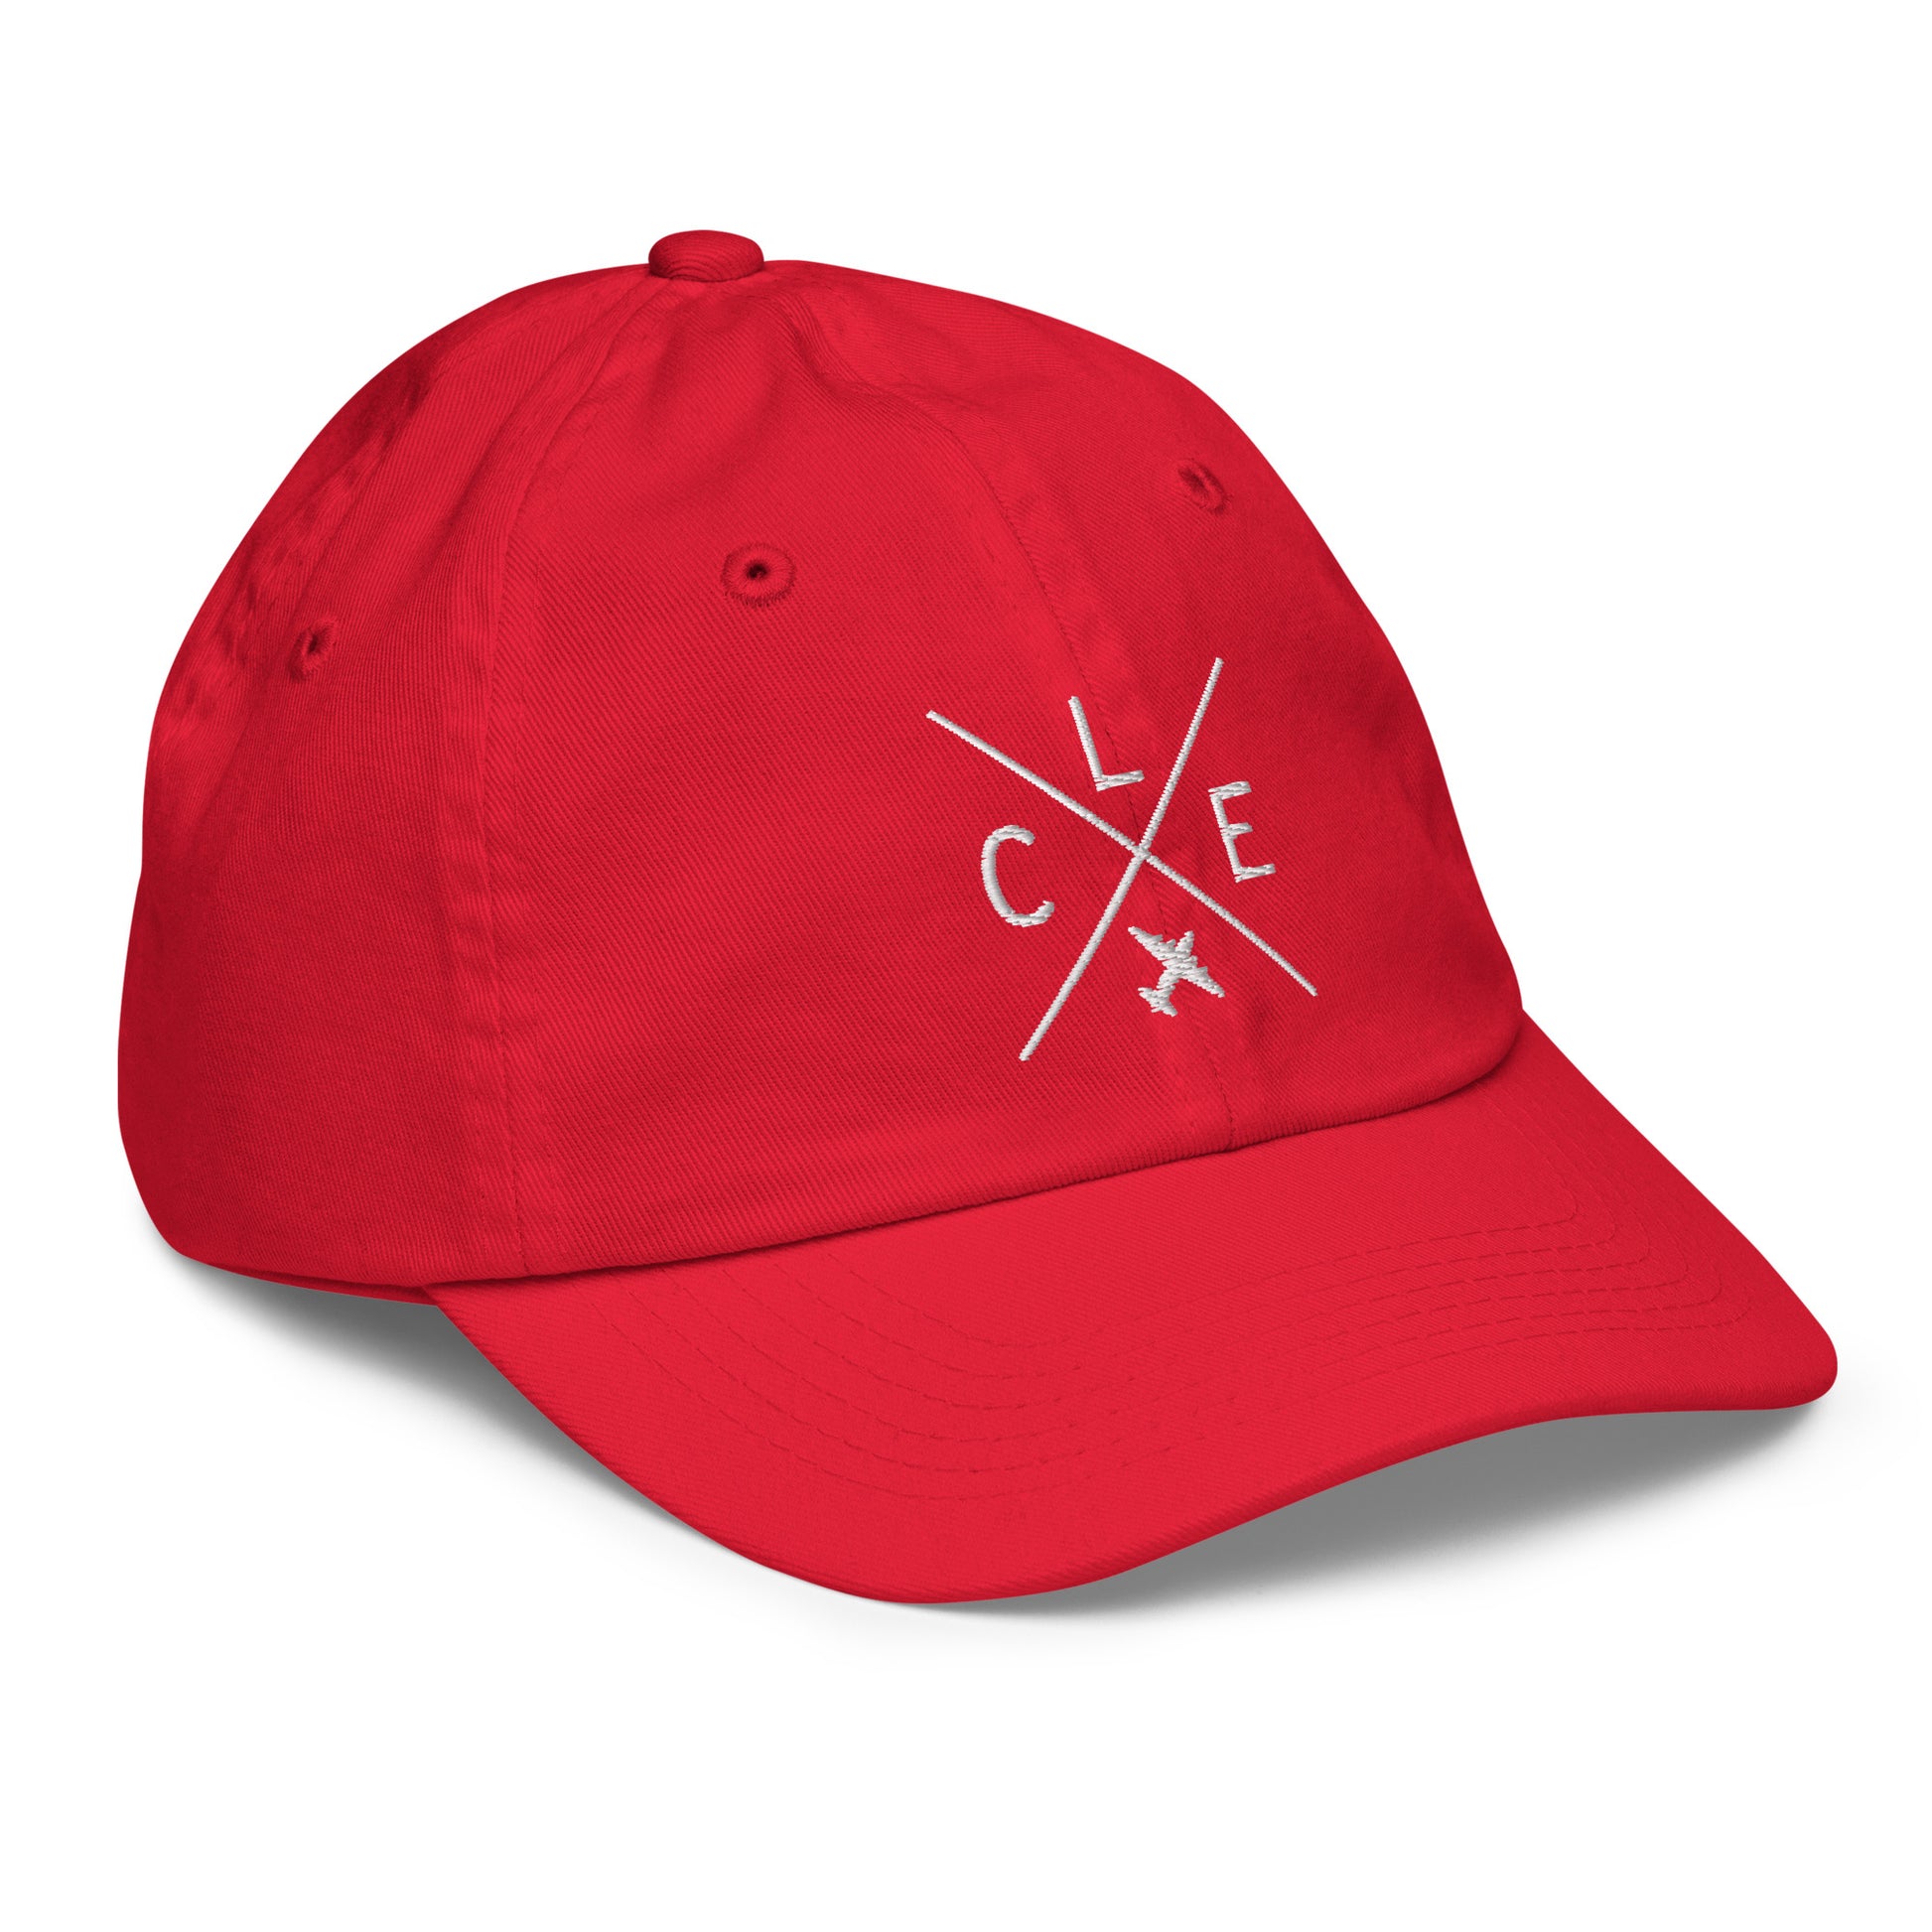 Crossed-X Kid's Baseball Cap - White • CLE Cleveland • YHM Designs - Image 18